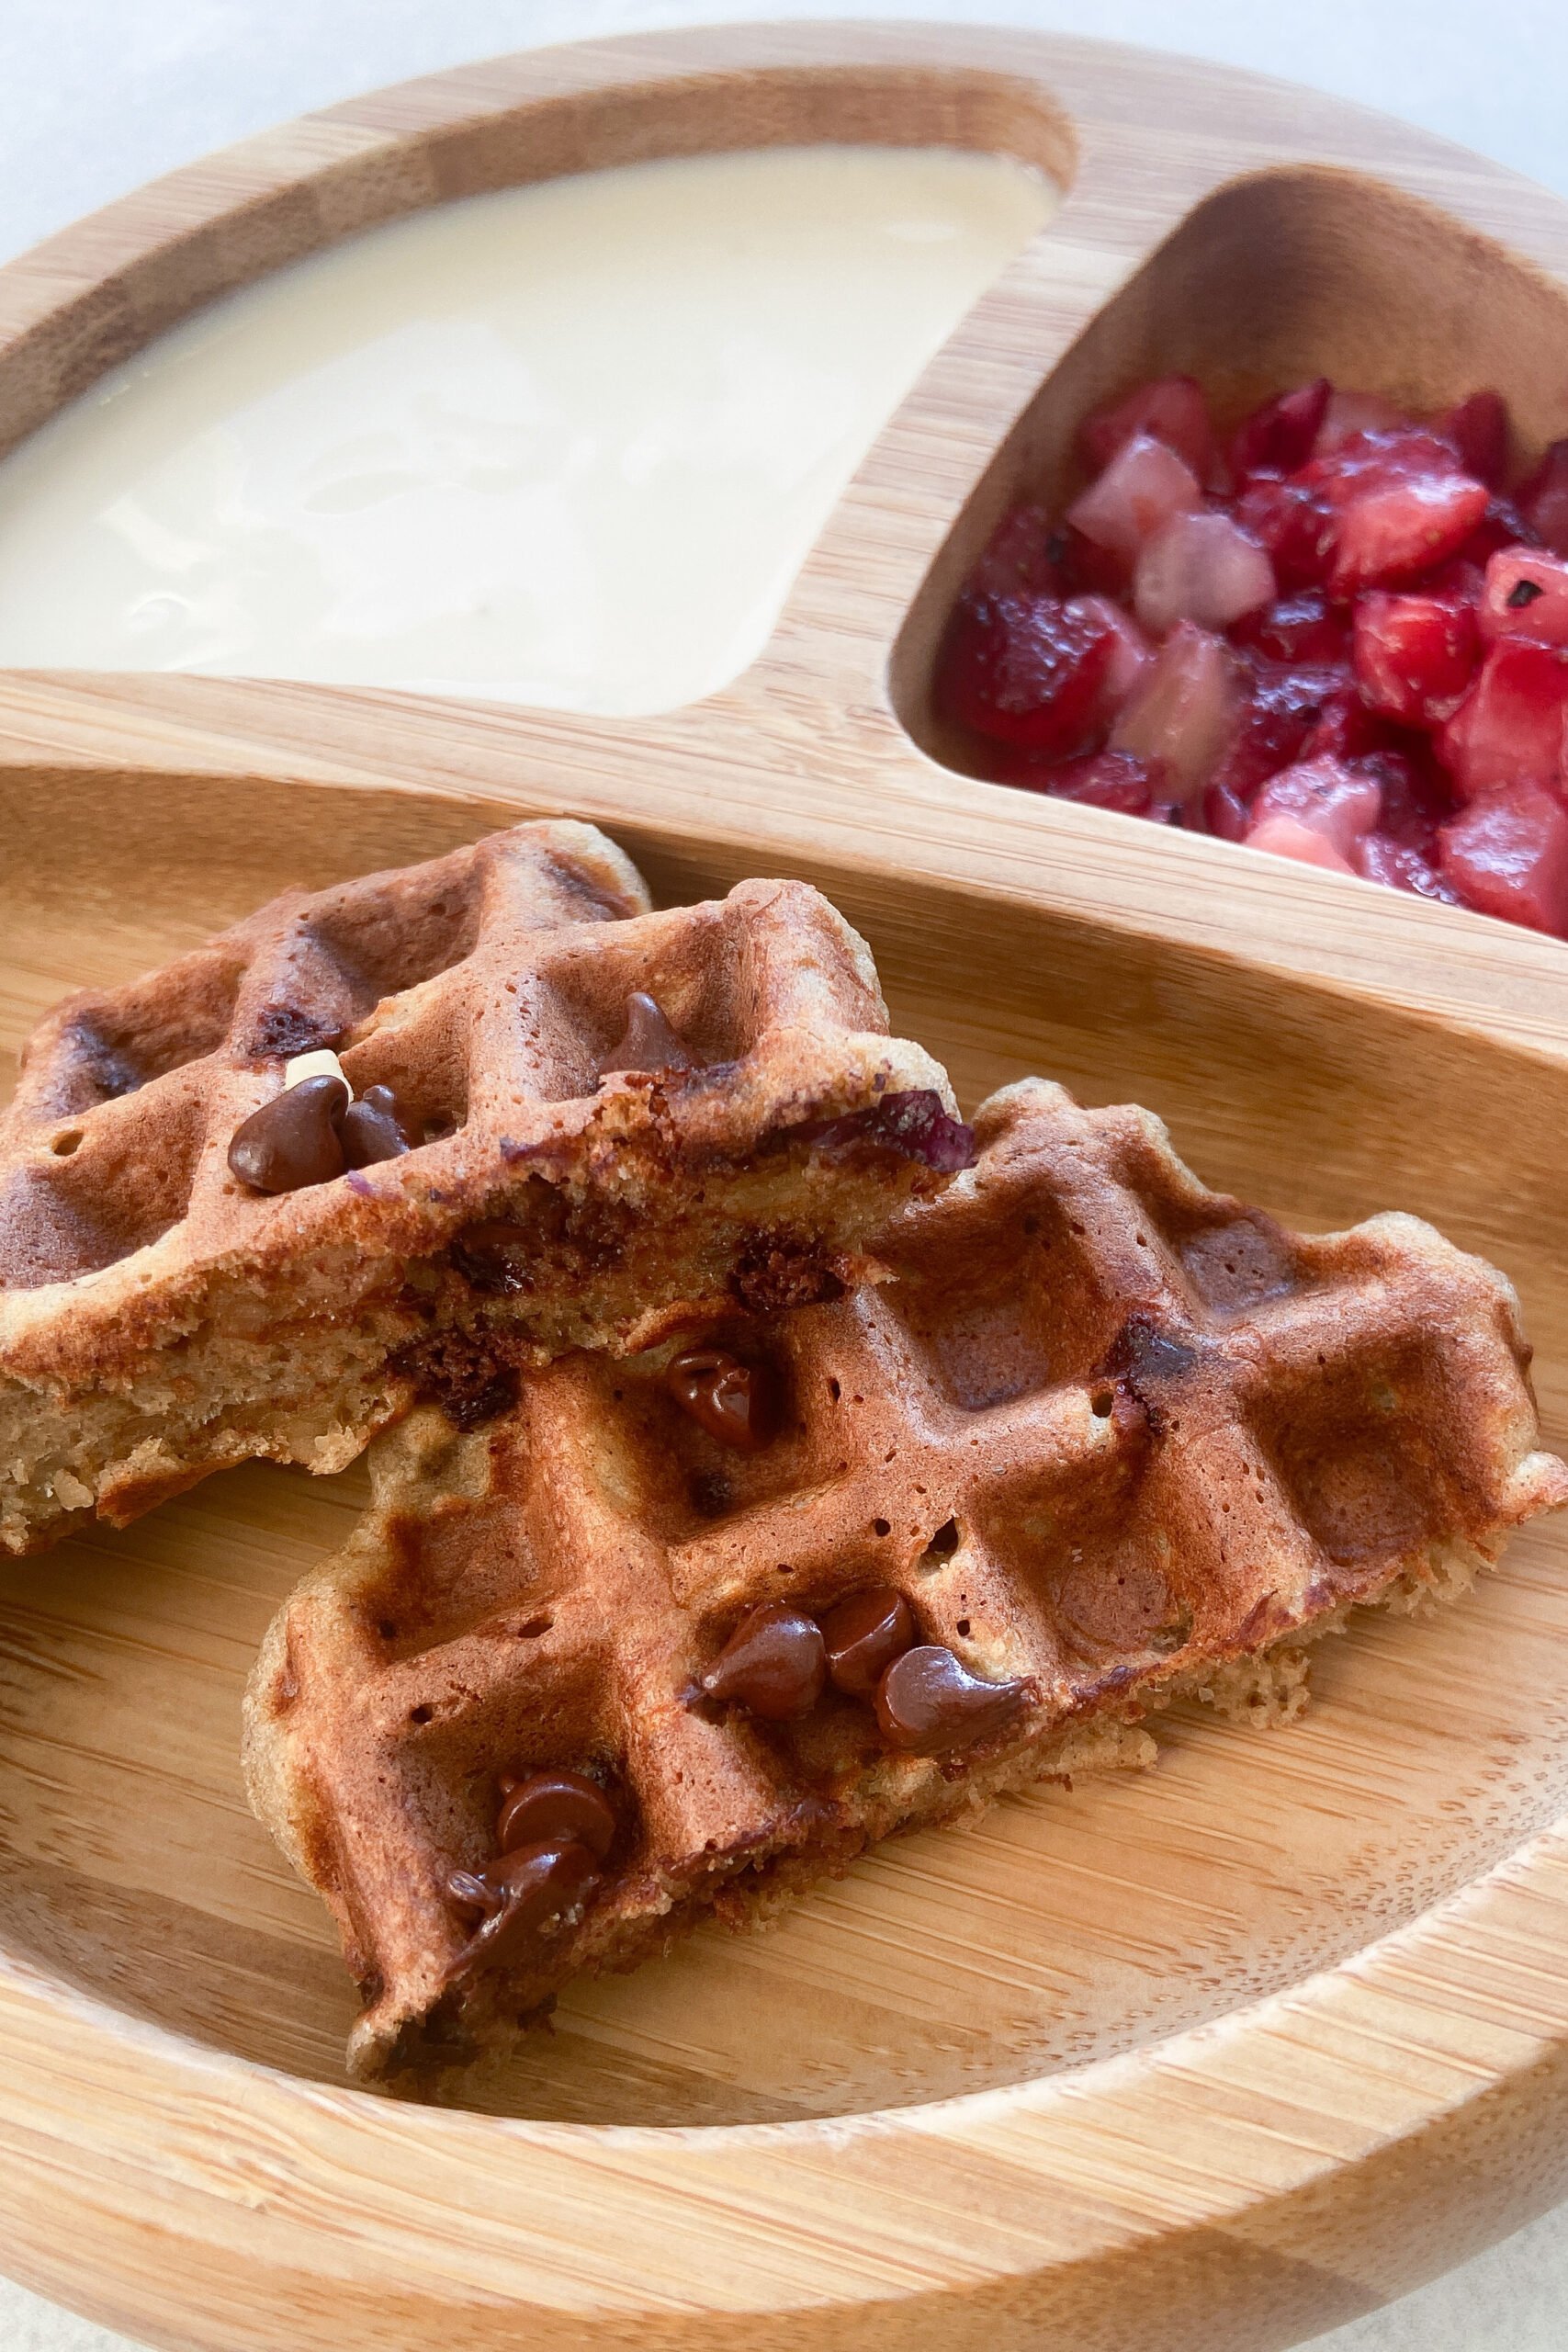 Chocolate chip banana oat waffles served with yogurt and berries